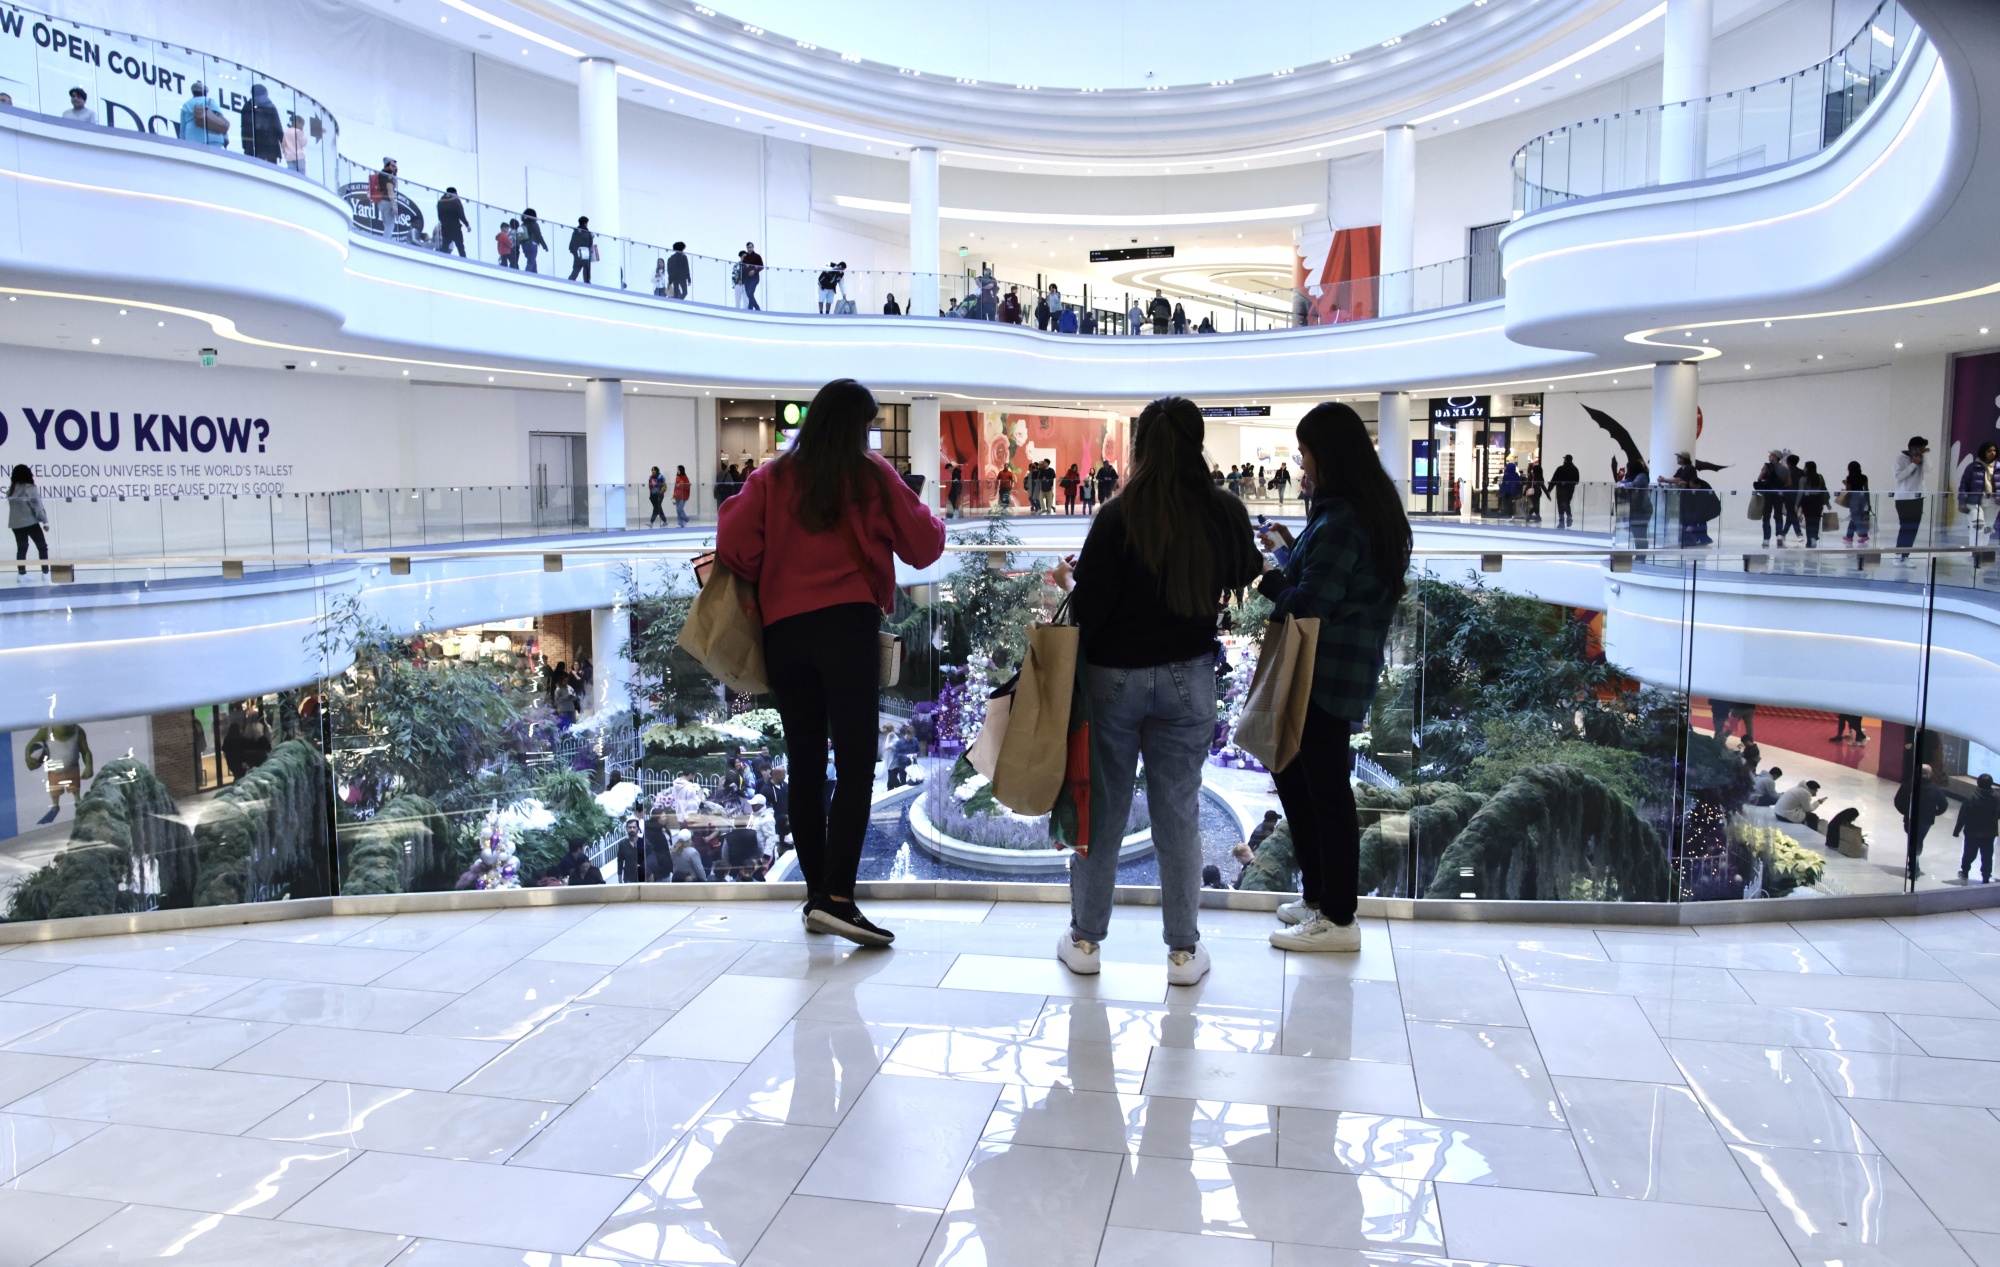 New Jersey Mall American Dream Is Almost in Default